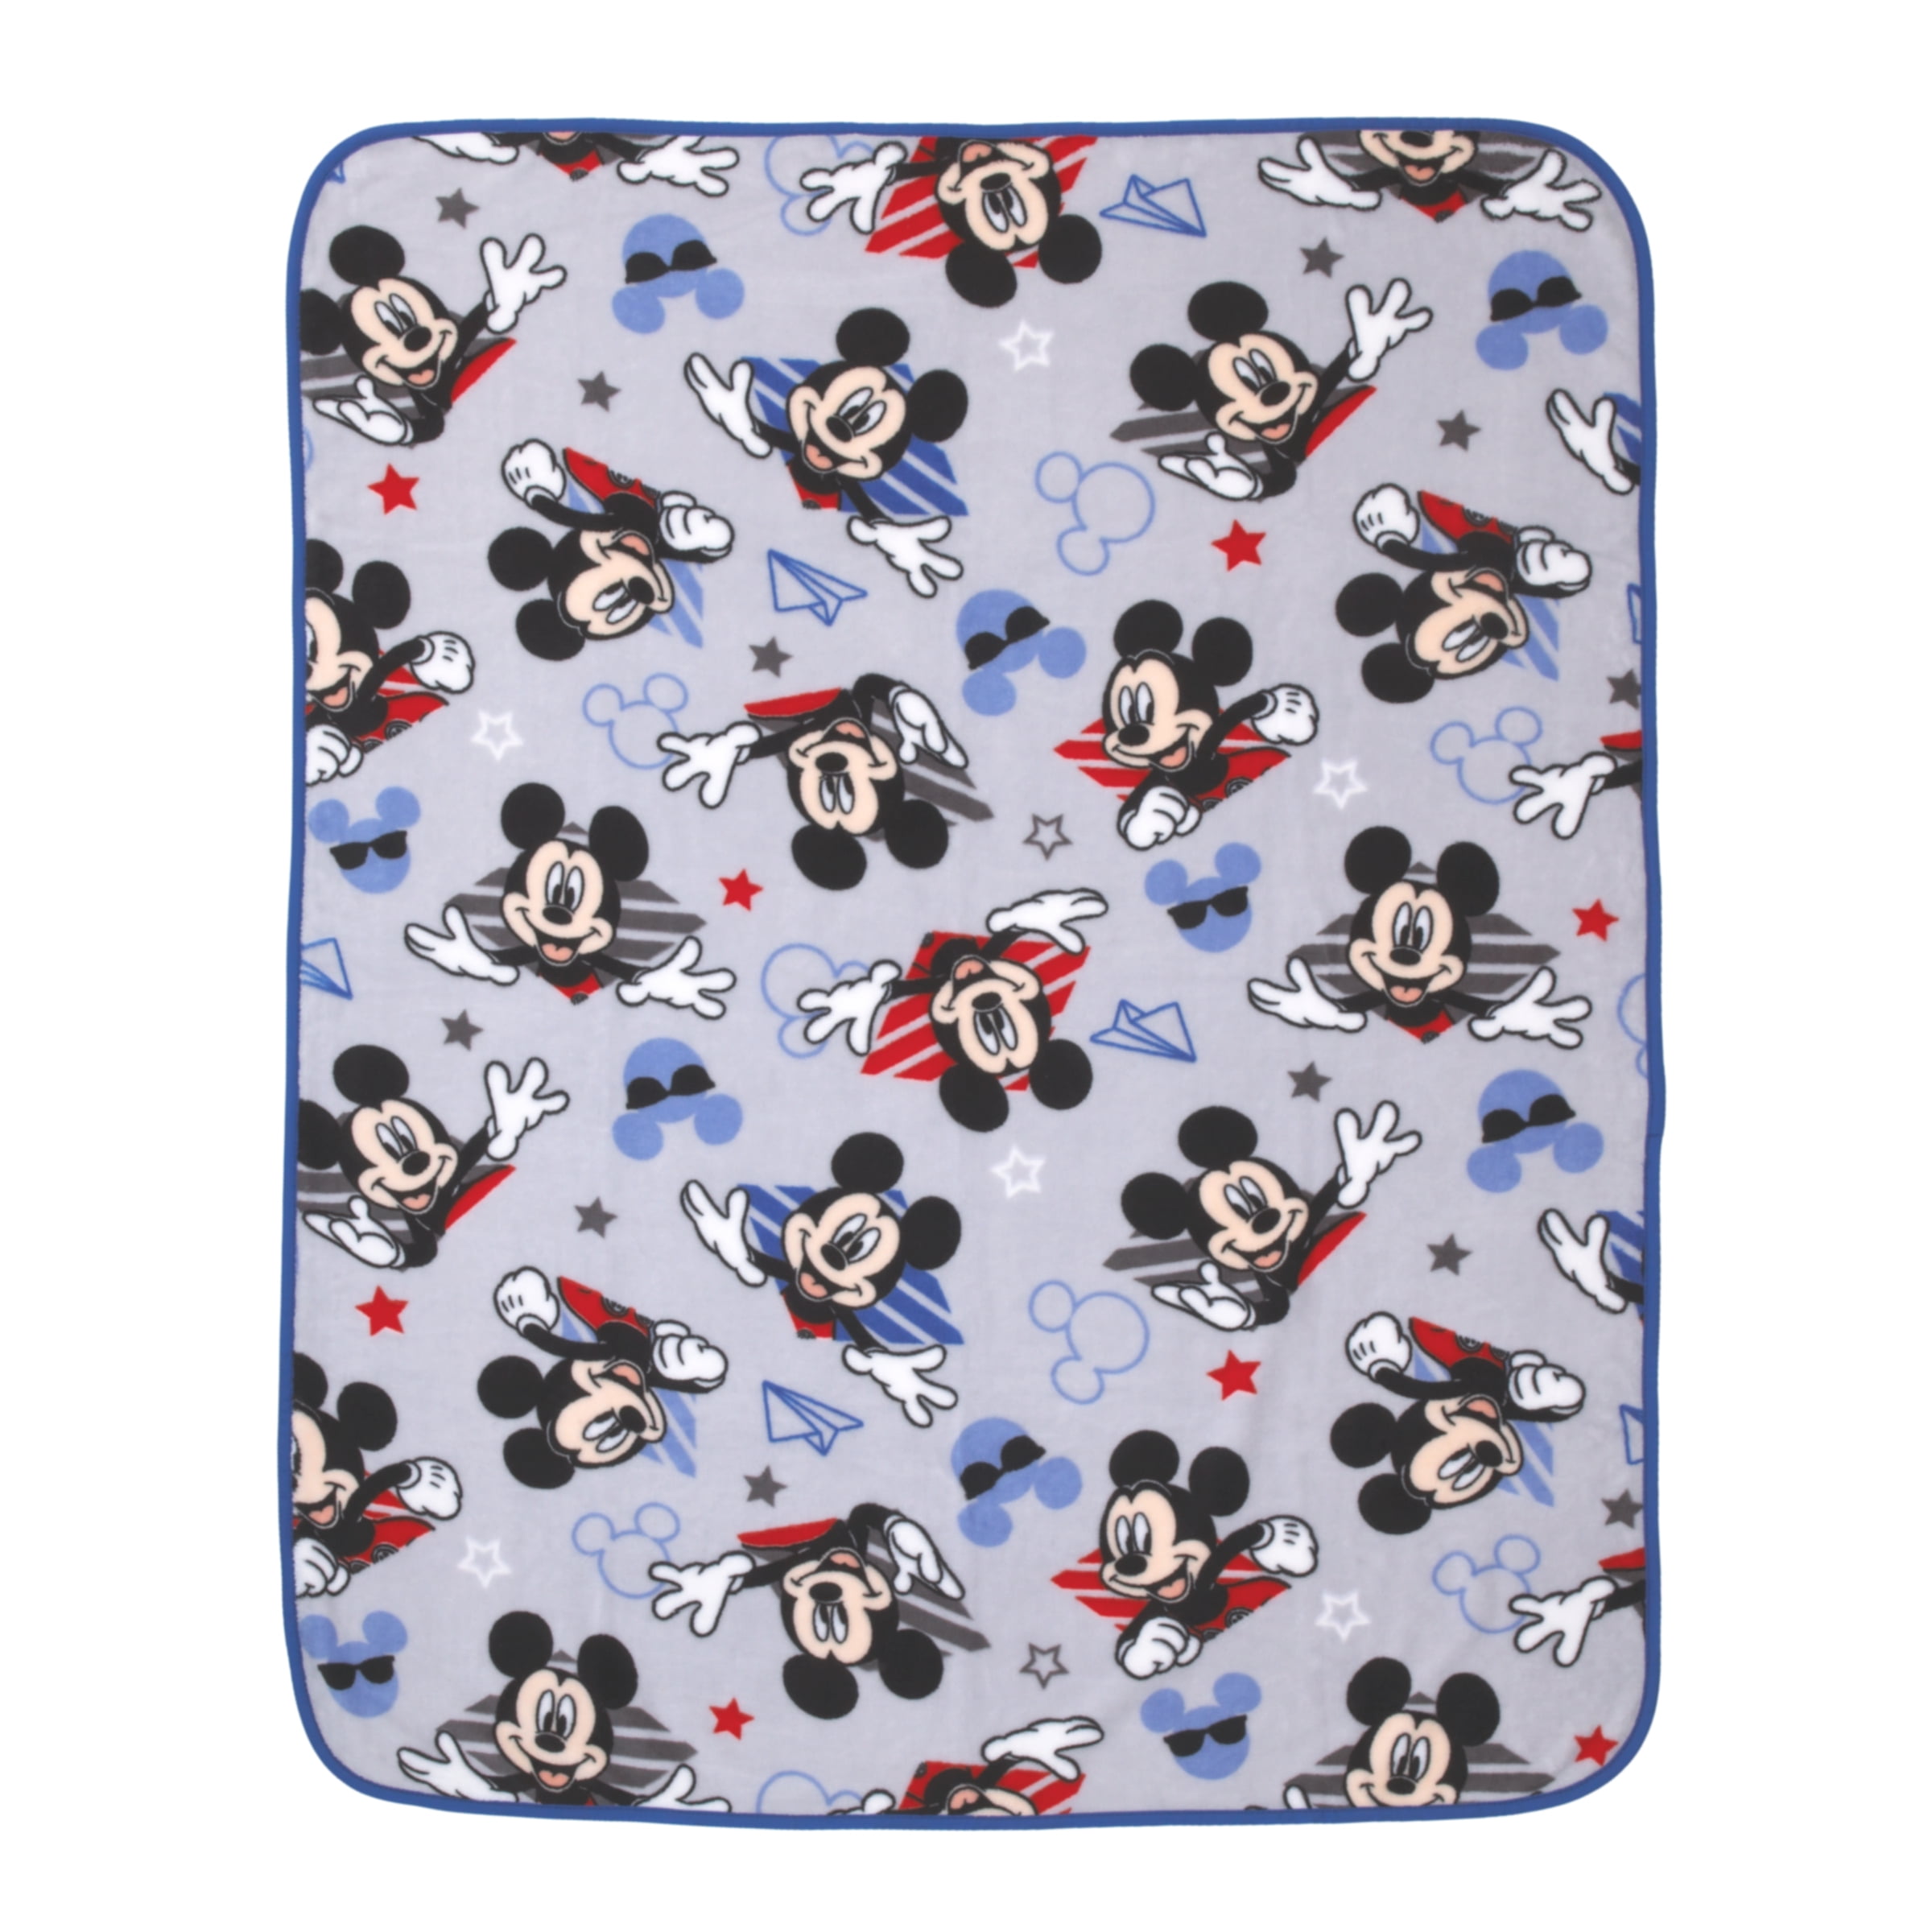 Disney Mickey Mouse Toddler Blanket, 40"x50"